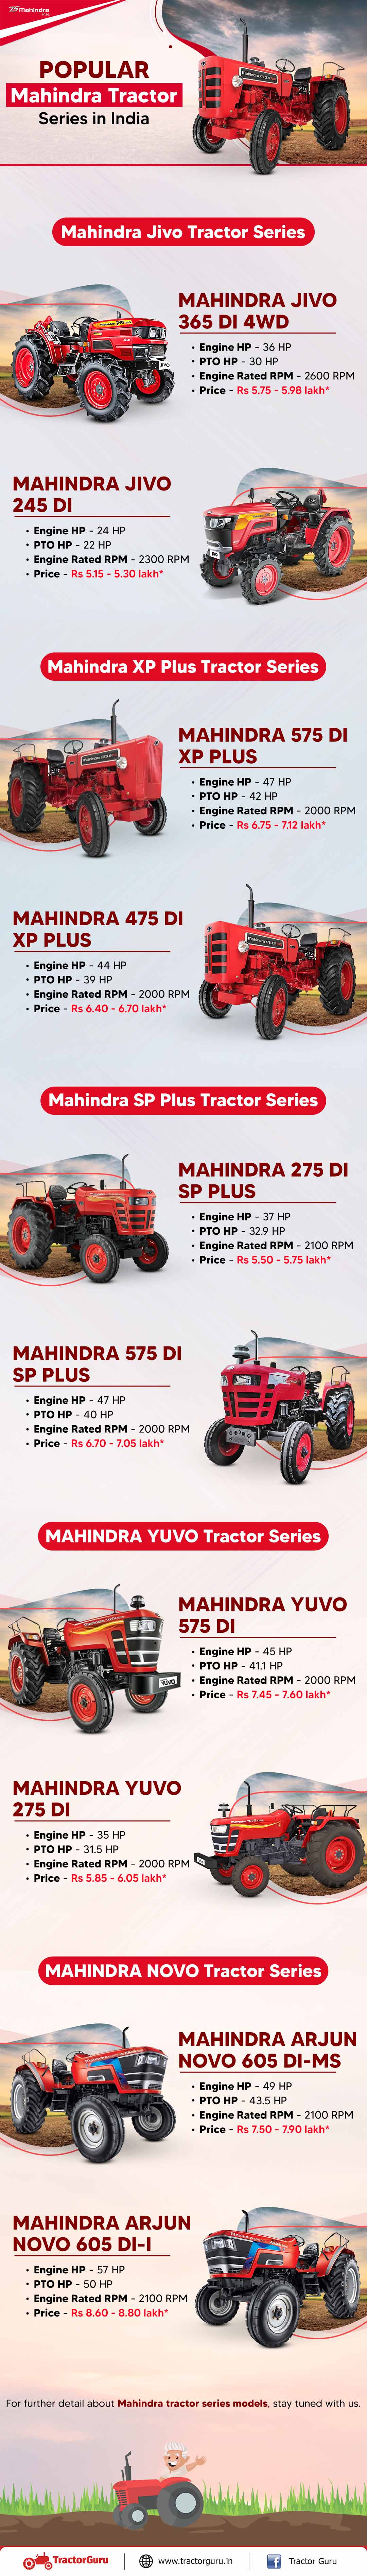 Infographic Mahindra Tractor Series in India